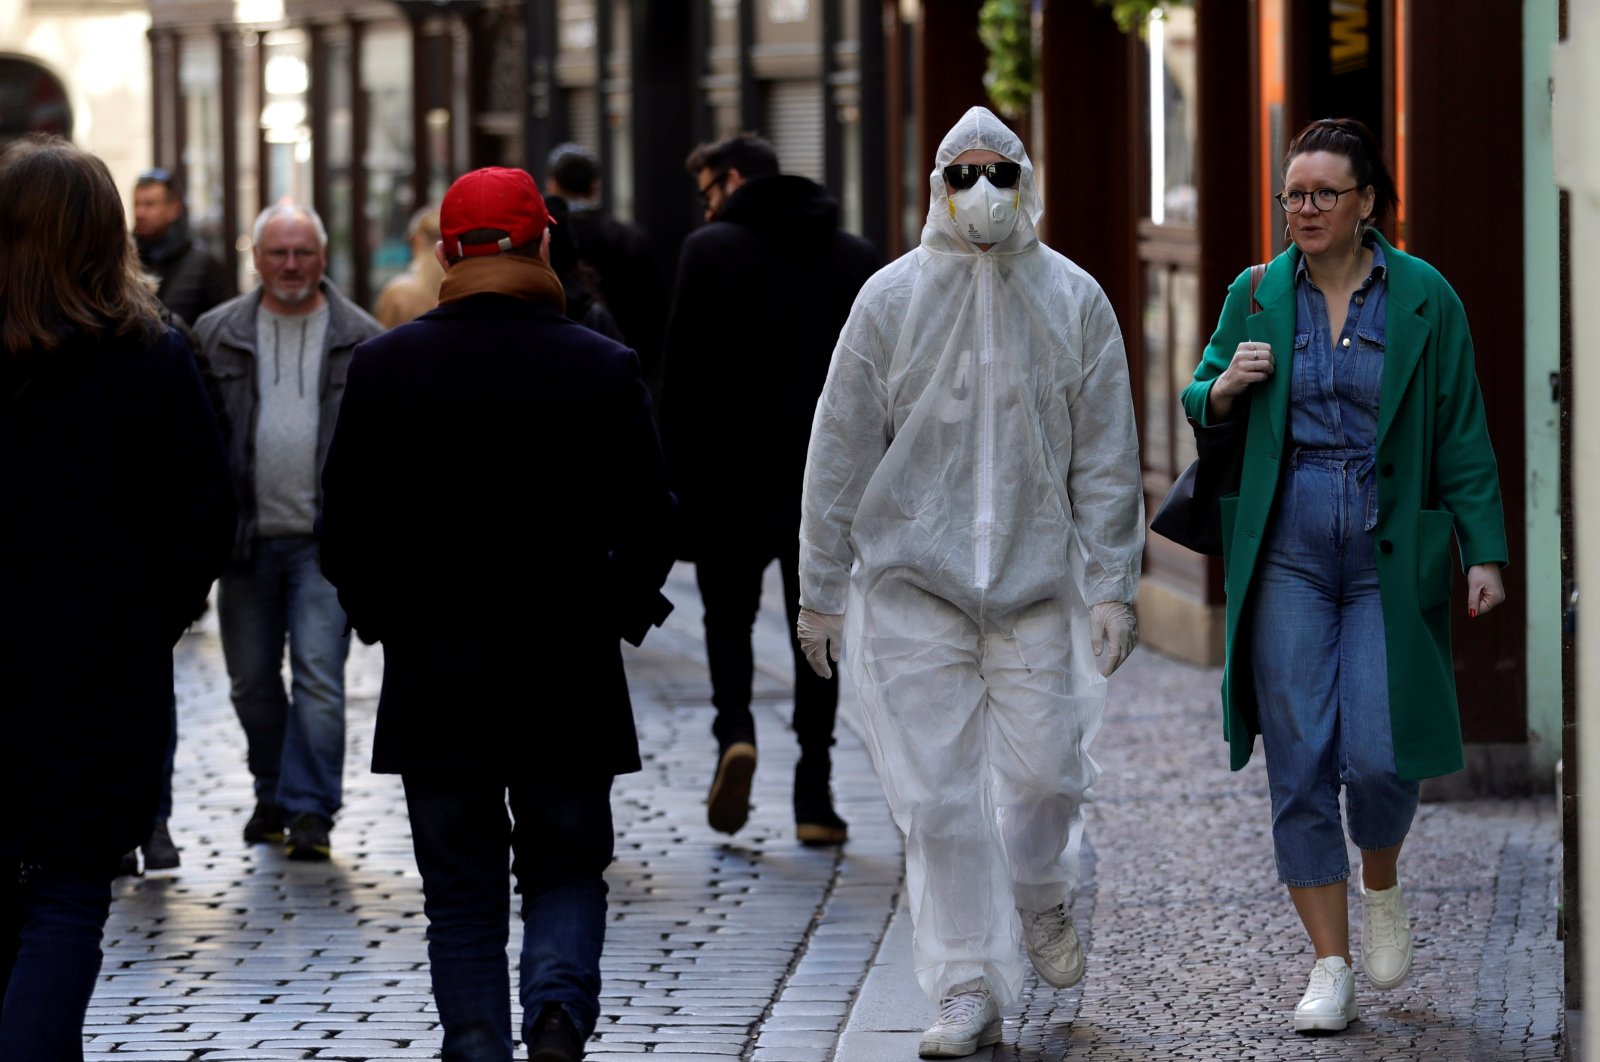 A man wearing a protective suit walks through the Prague city center, as the Czech government shut most shops and restaurants for 10 days as part of measures to contain the spread of the new coronavirus disease, Czech Republic, March 14, 2020. (Reuters Photo)